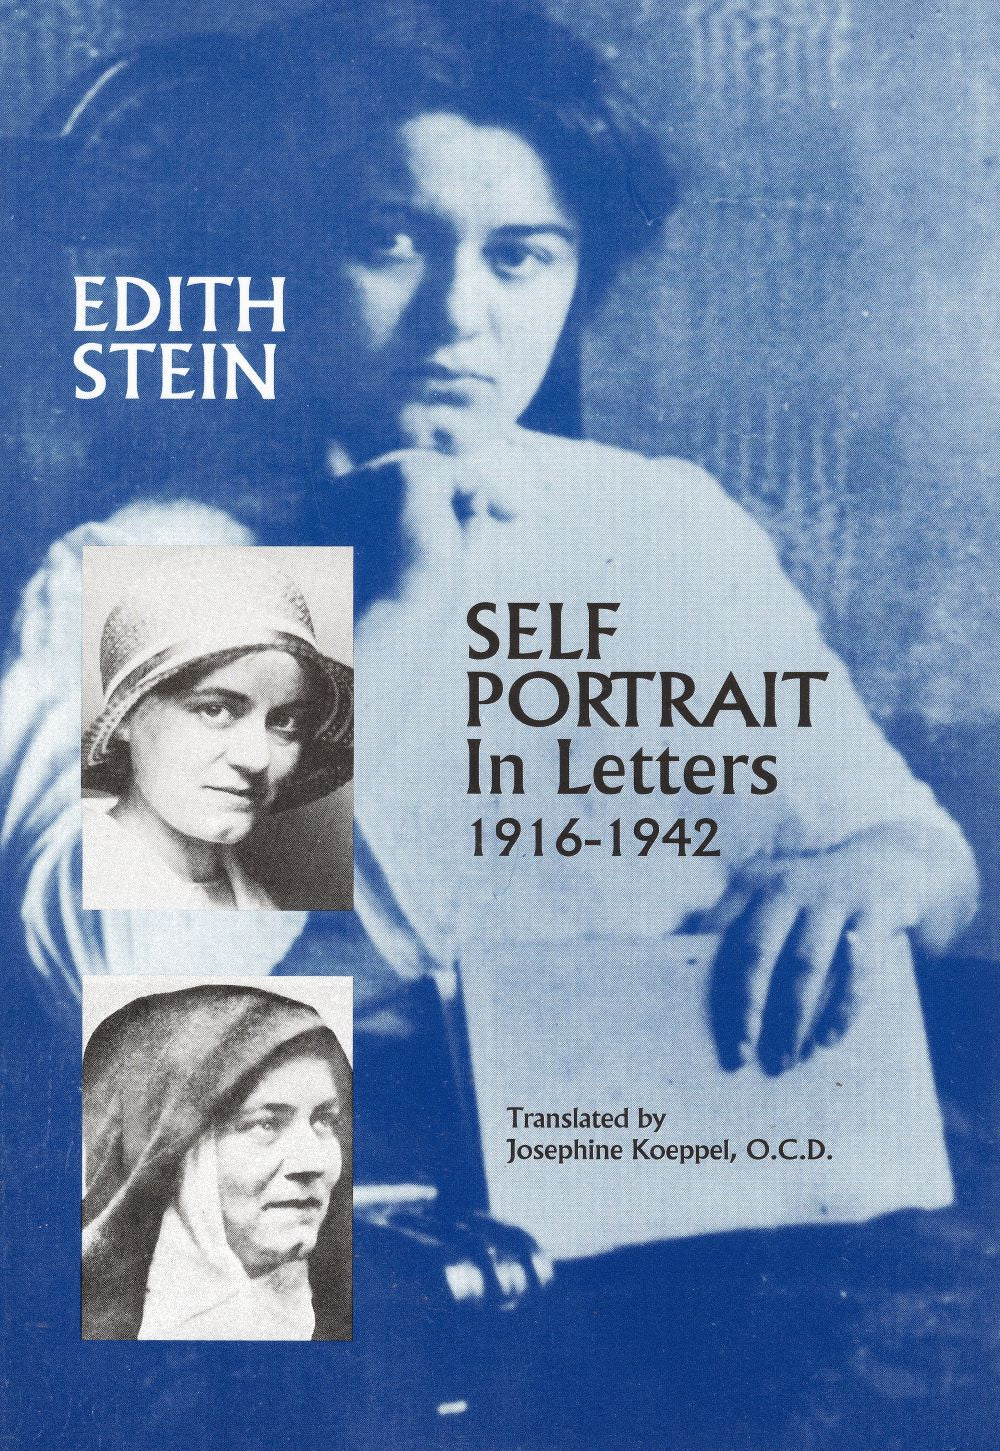 COLLECTED WORKS EDITH STEIN 5: Self Portrait in Letters, 1916-1942